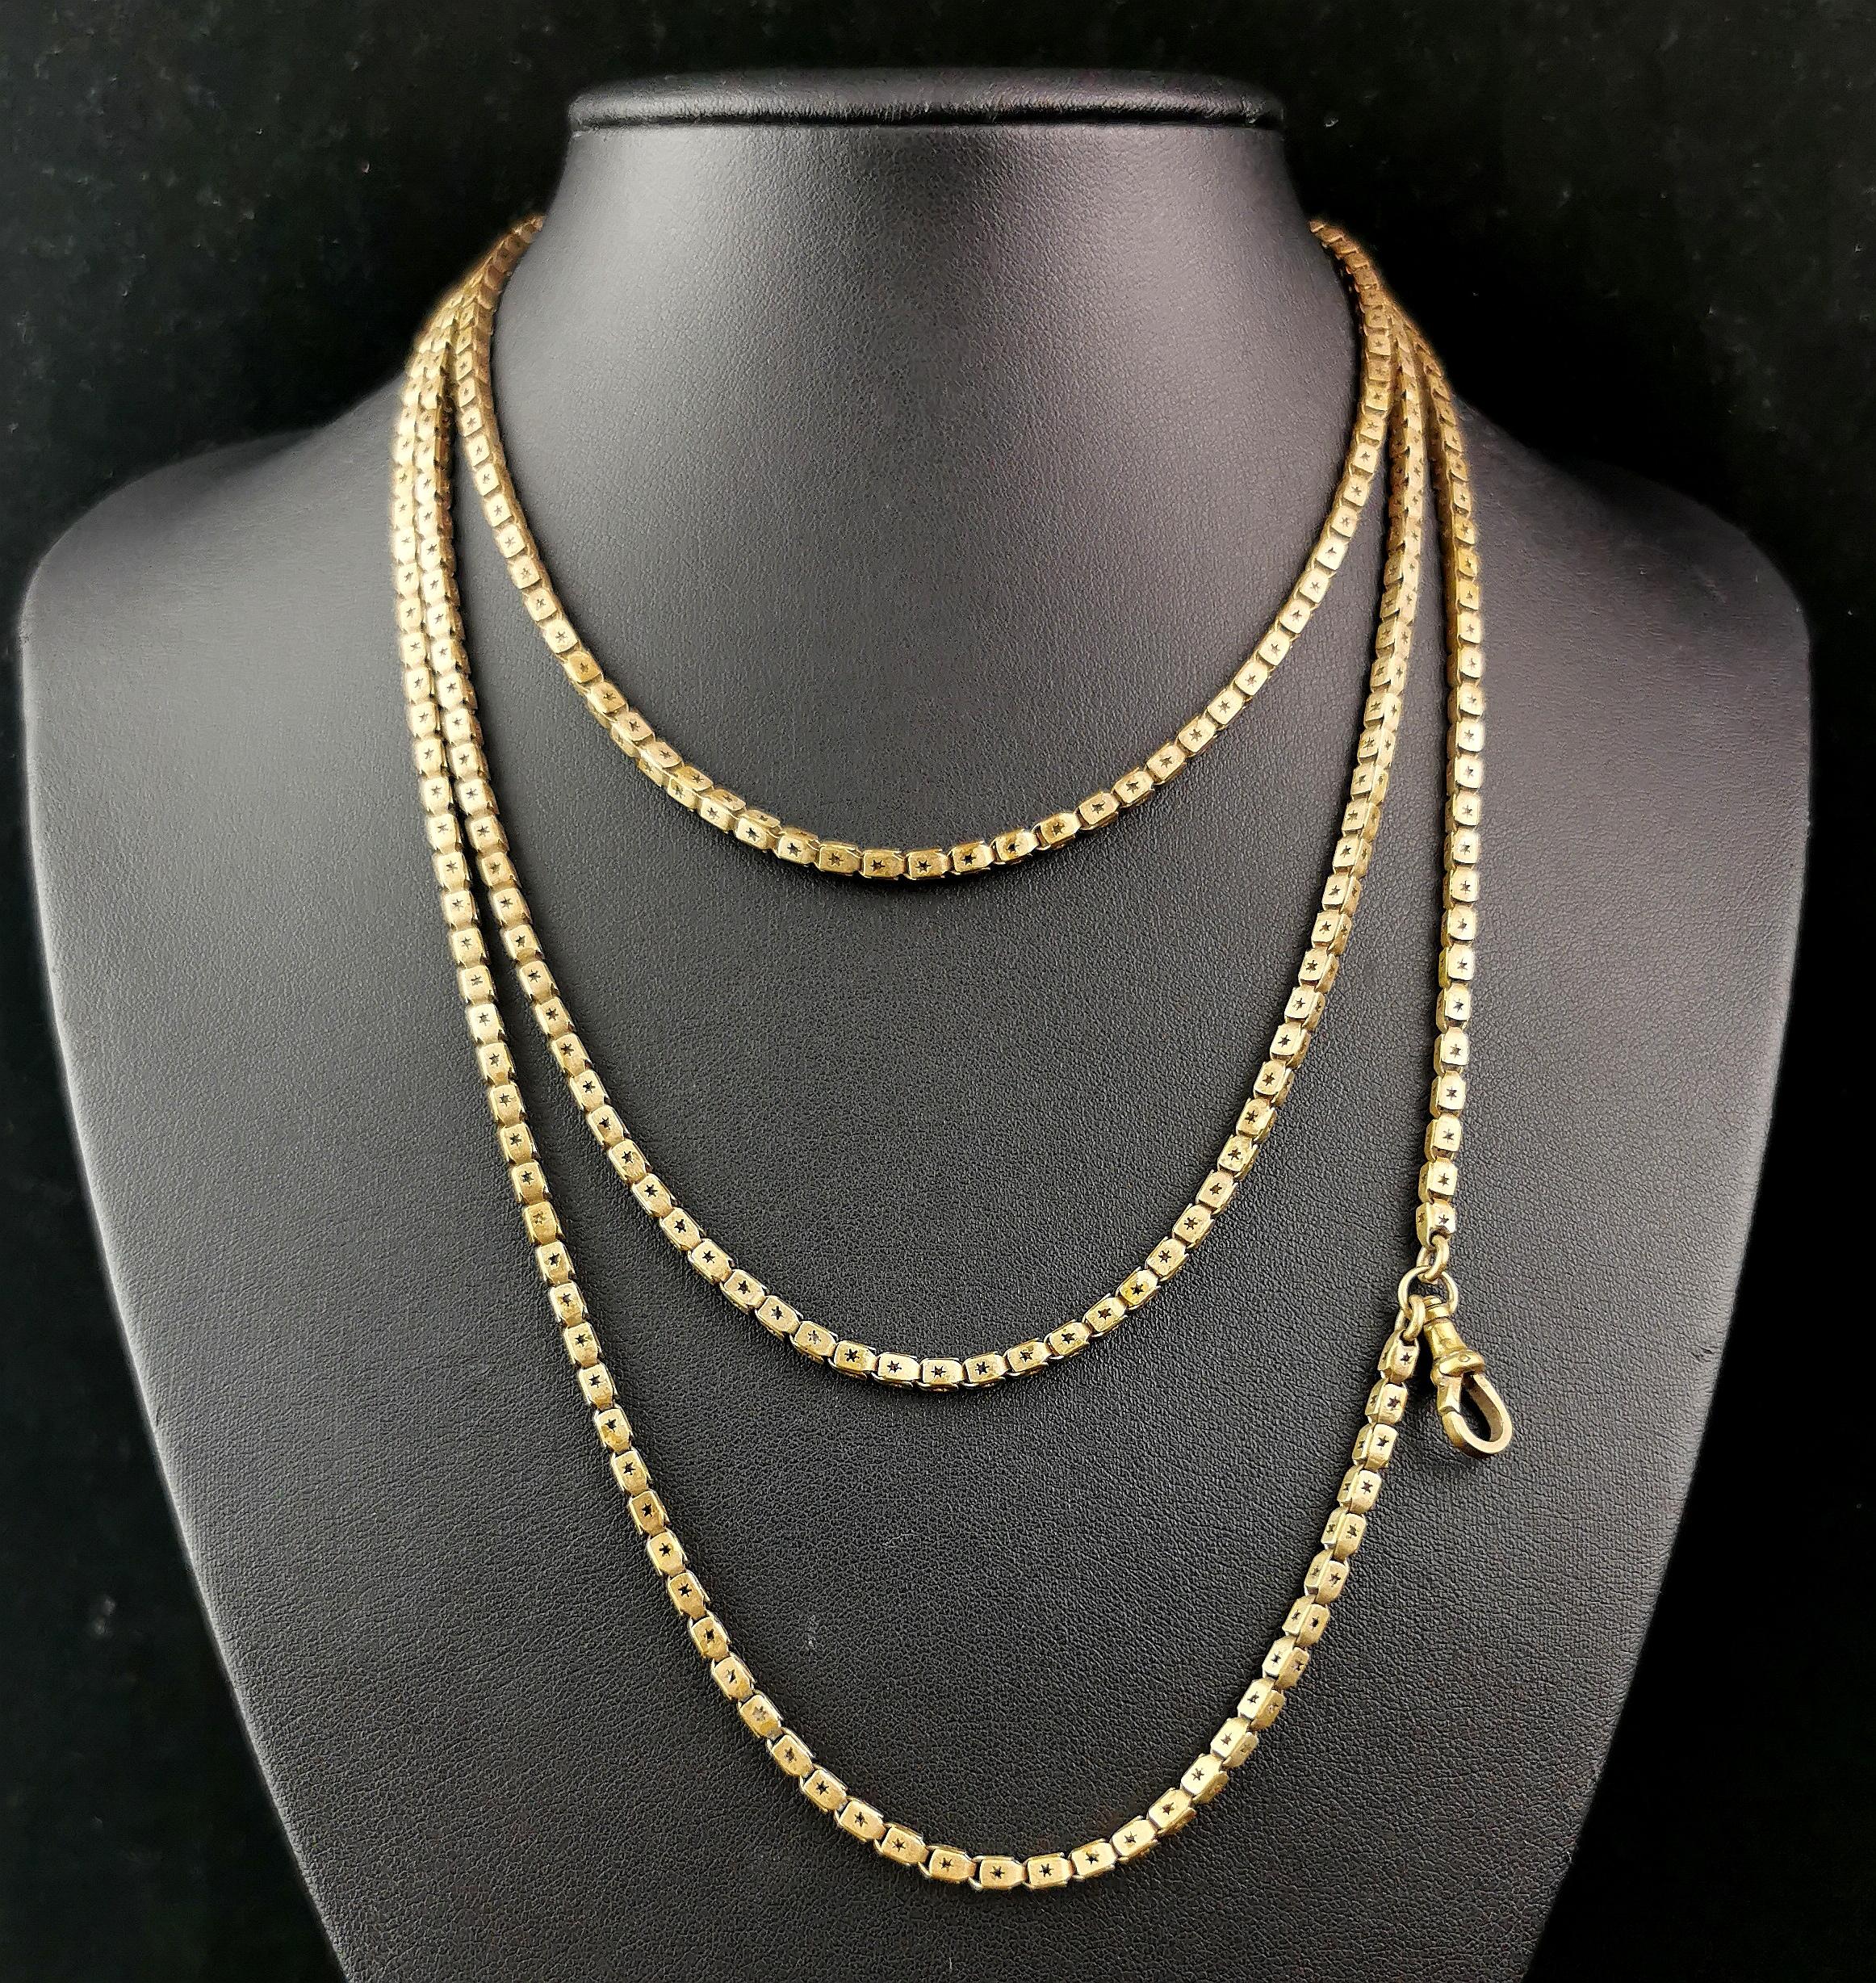 A gorgeous antique gilt brass fancy link chain necklace.

This chain has hollow box links each punched with a cut out star design giving it a fab celestial twist.

It has no fastener but it easily passes over the head with its lovely long length, it